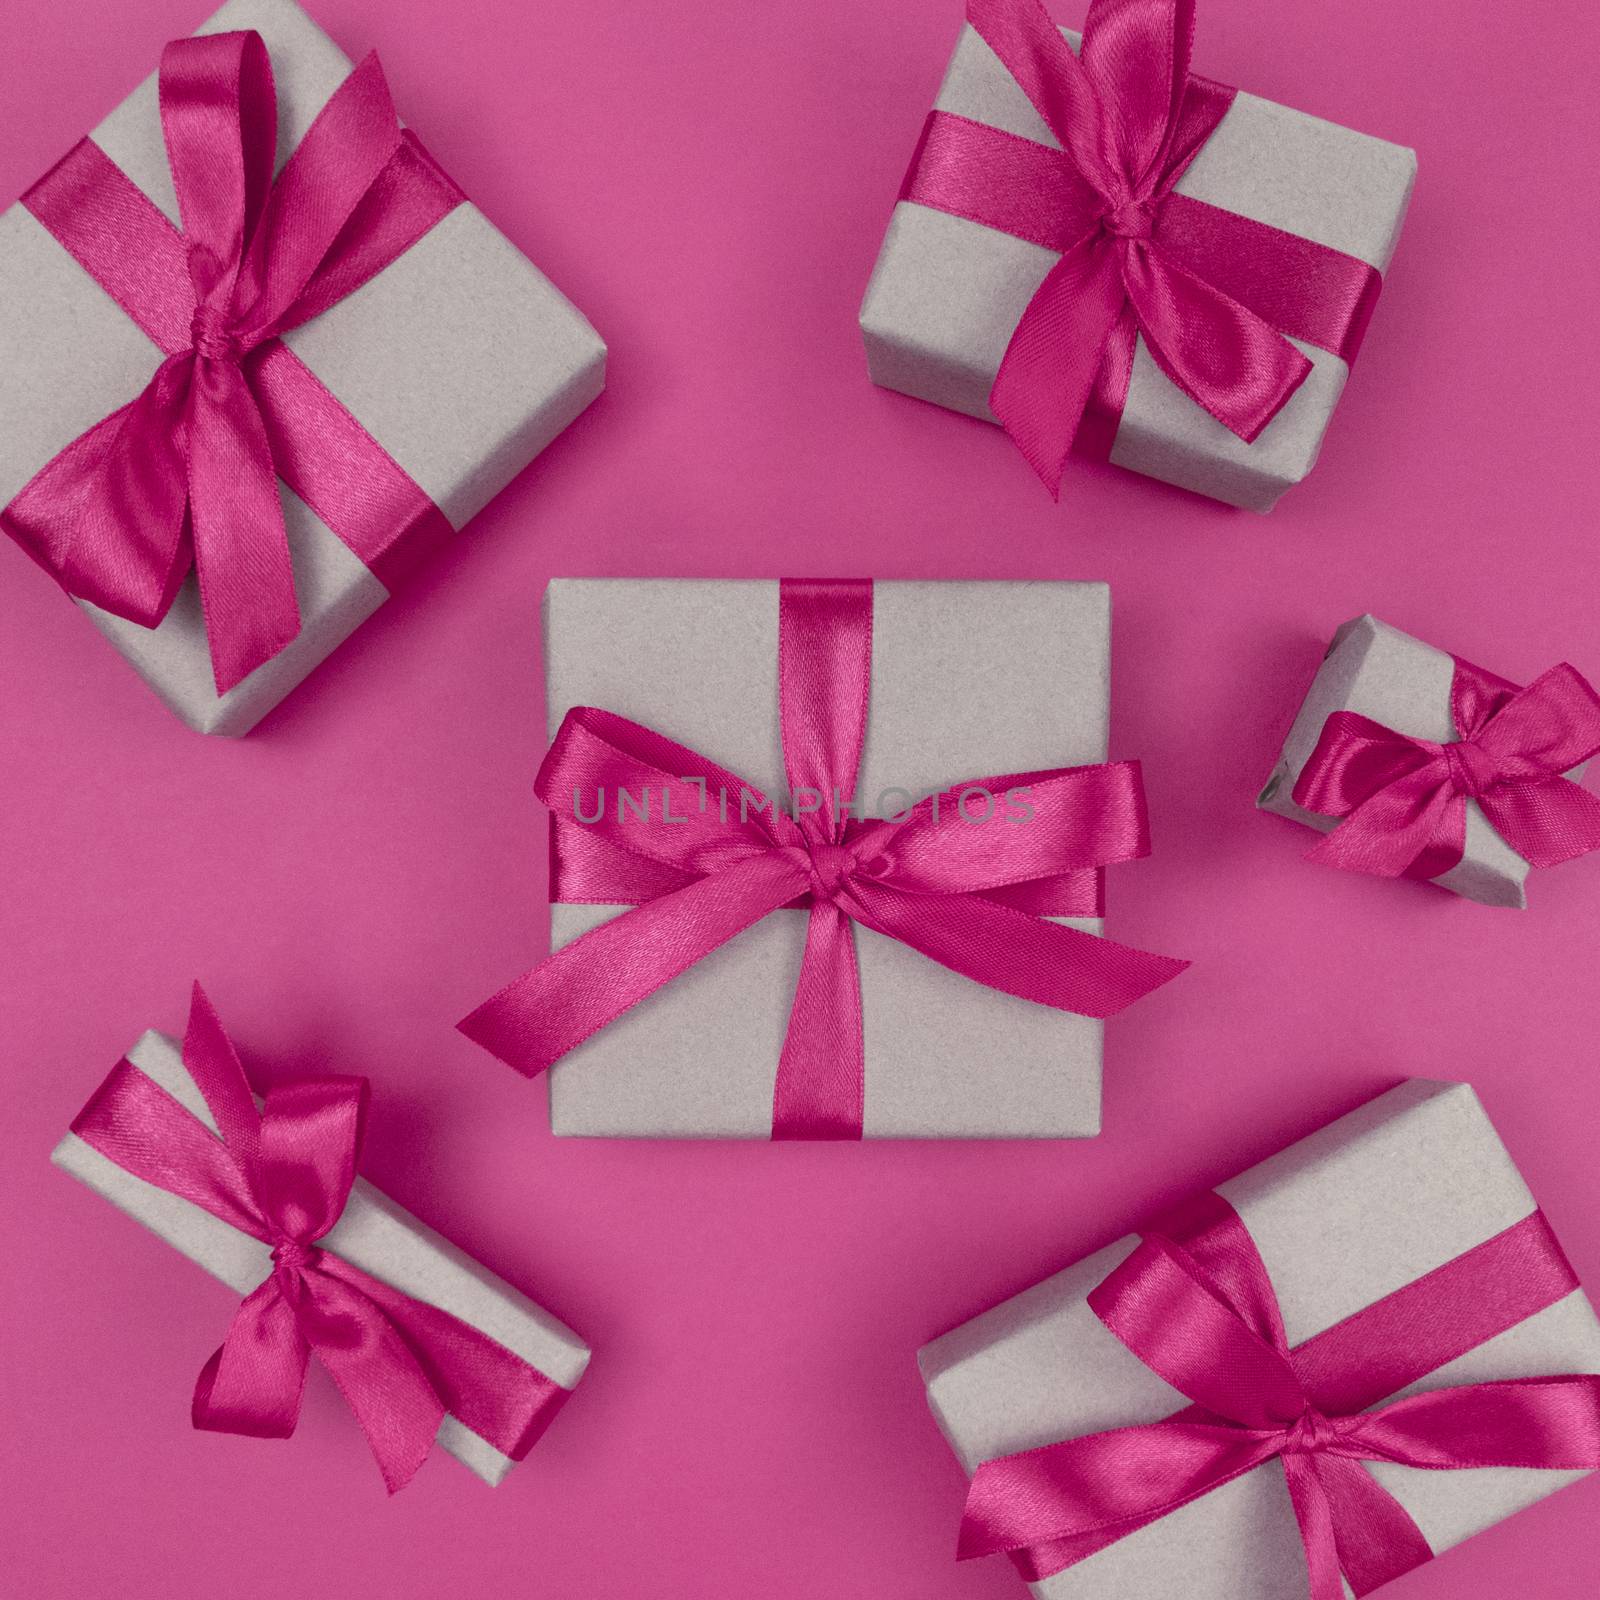 Gift boxes wrapped in a craft paper with pink ribbons and bows. Festive monochrome flat lay.